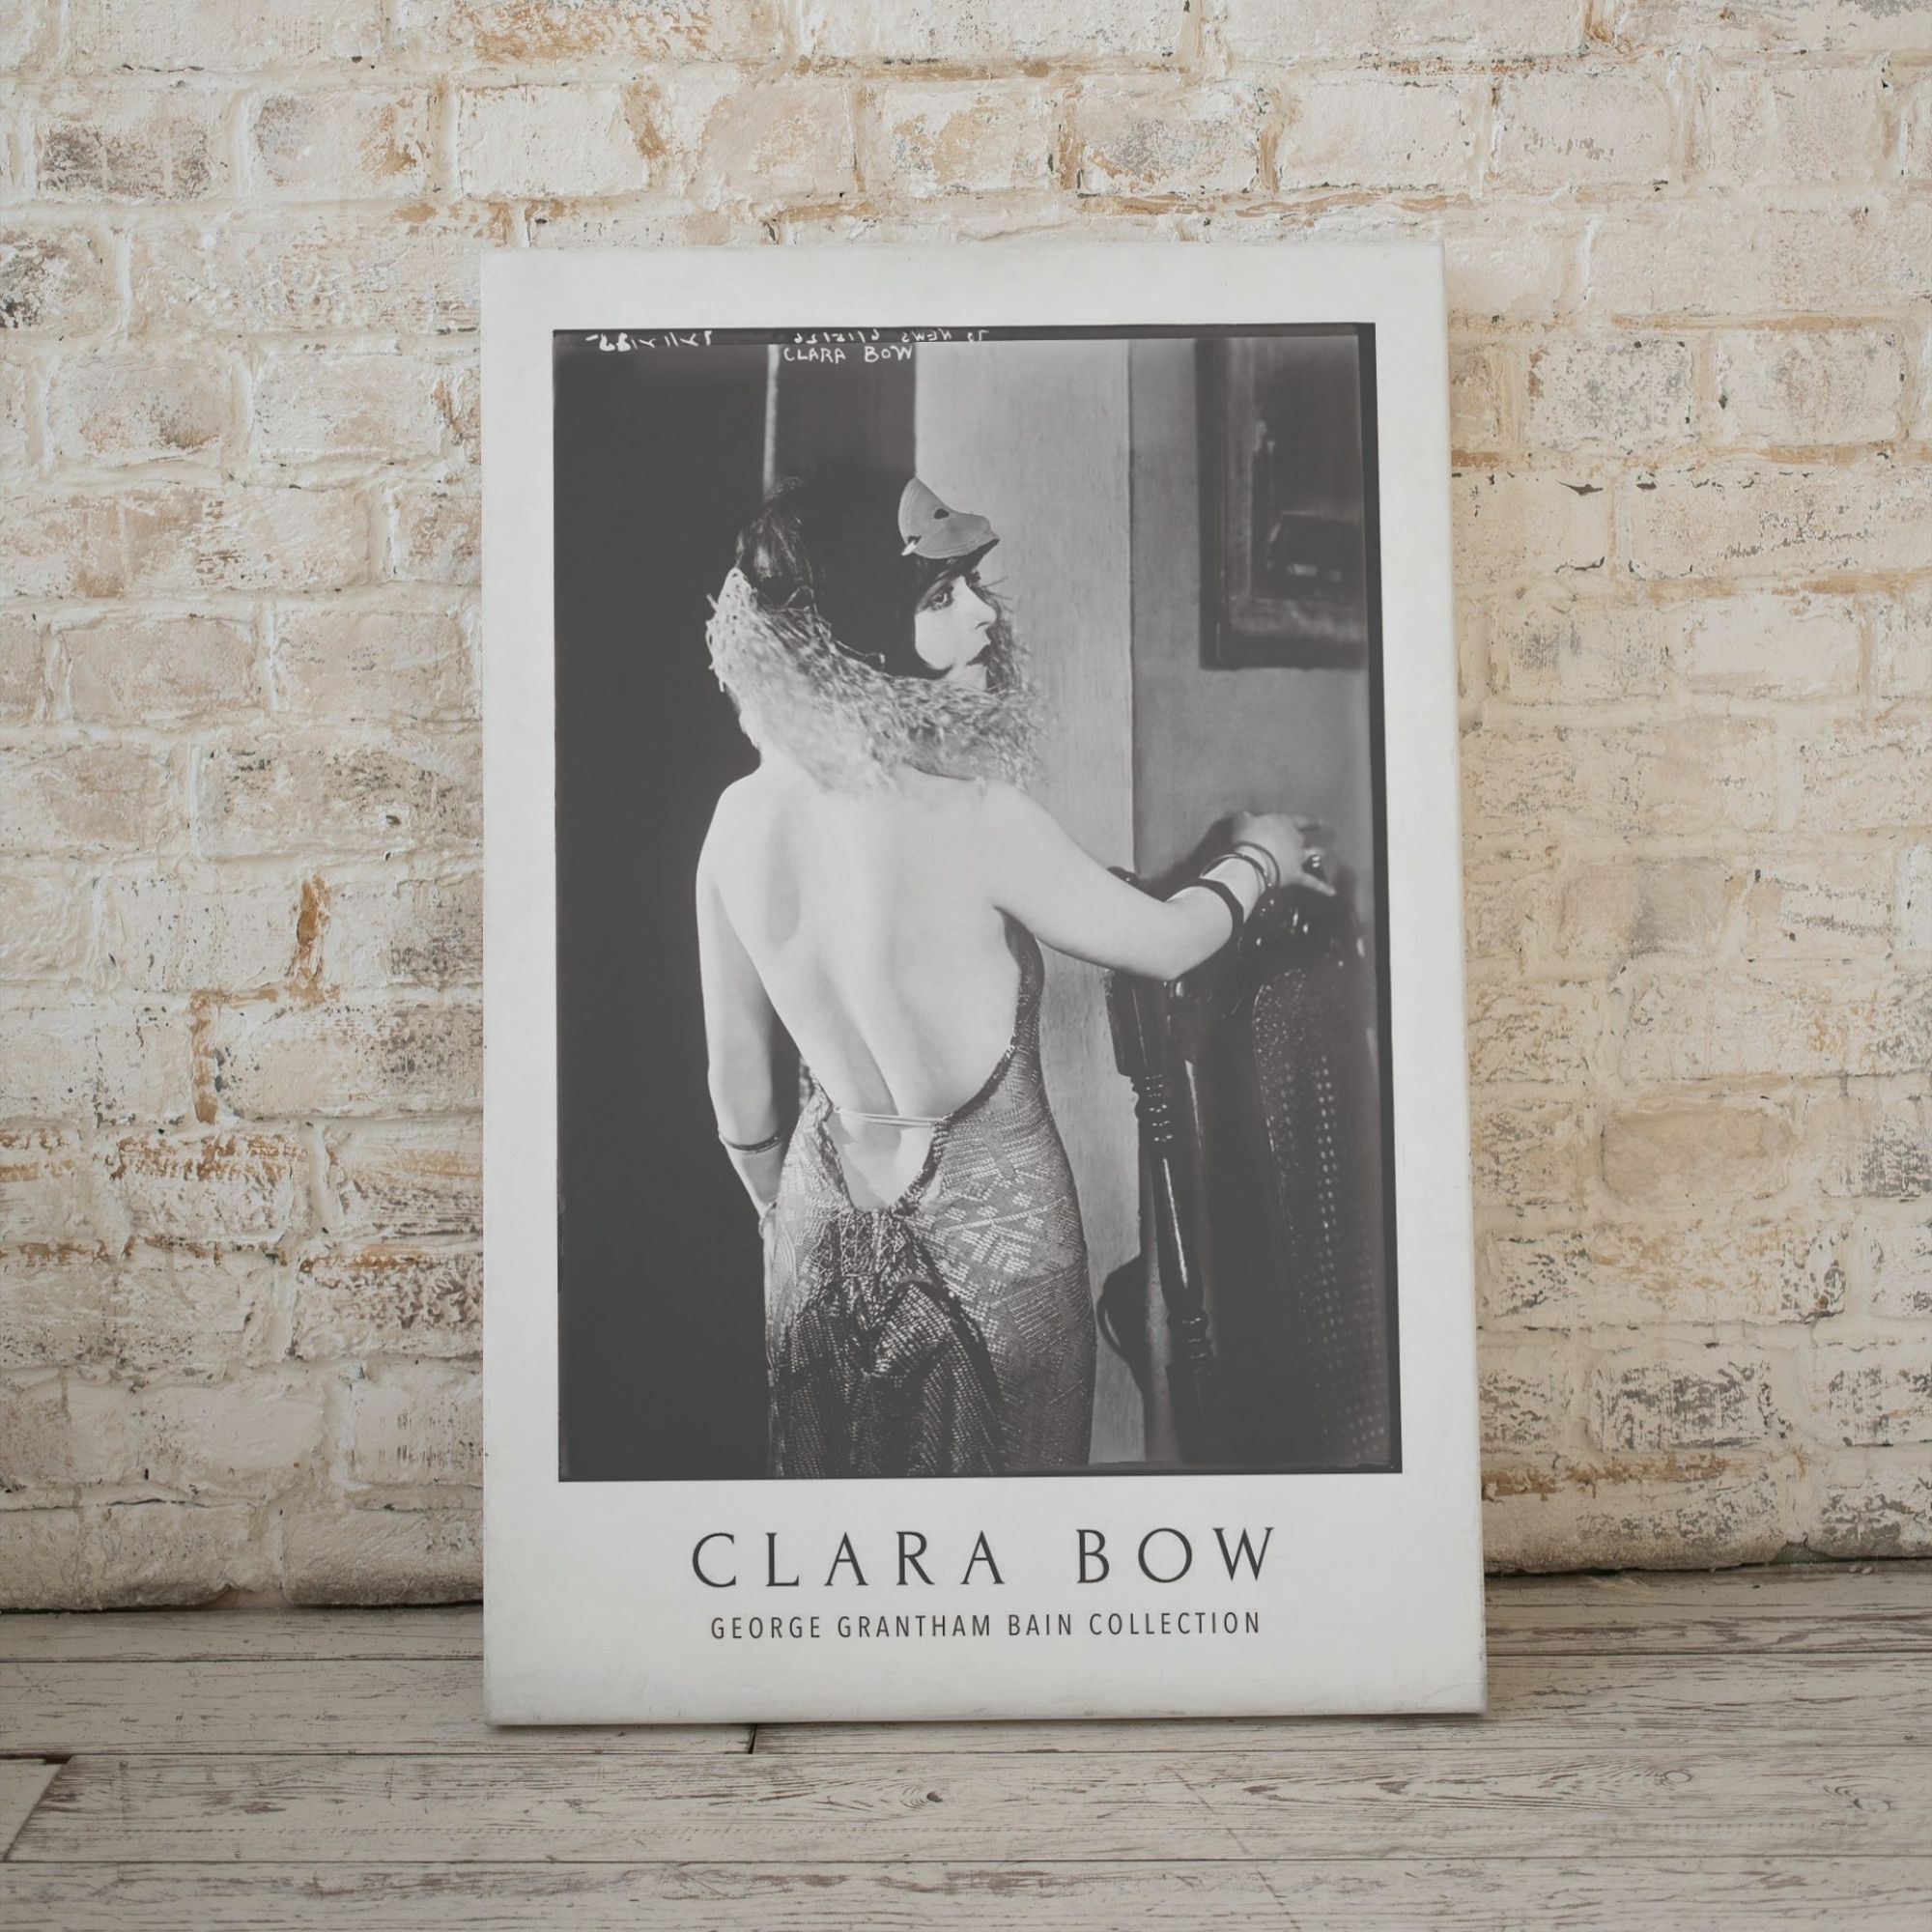 Clara Bow 'It Girl' Poster: A tribute to the 1920s silent film icon, embodying Roaring Twenties spirit and flapper culture, ideal for vintage film enthusiasts and decor.